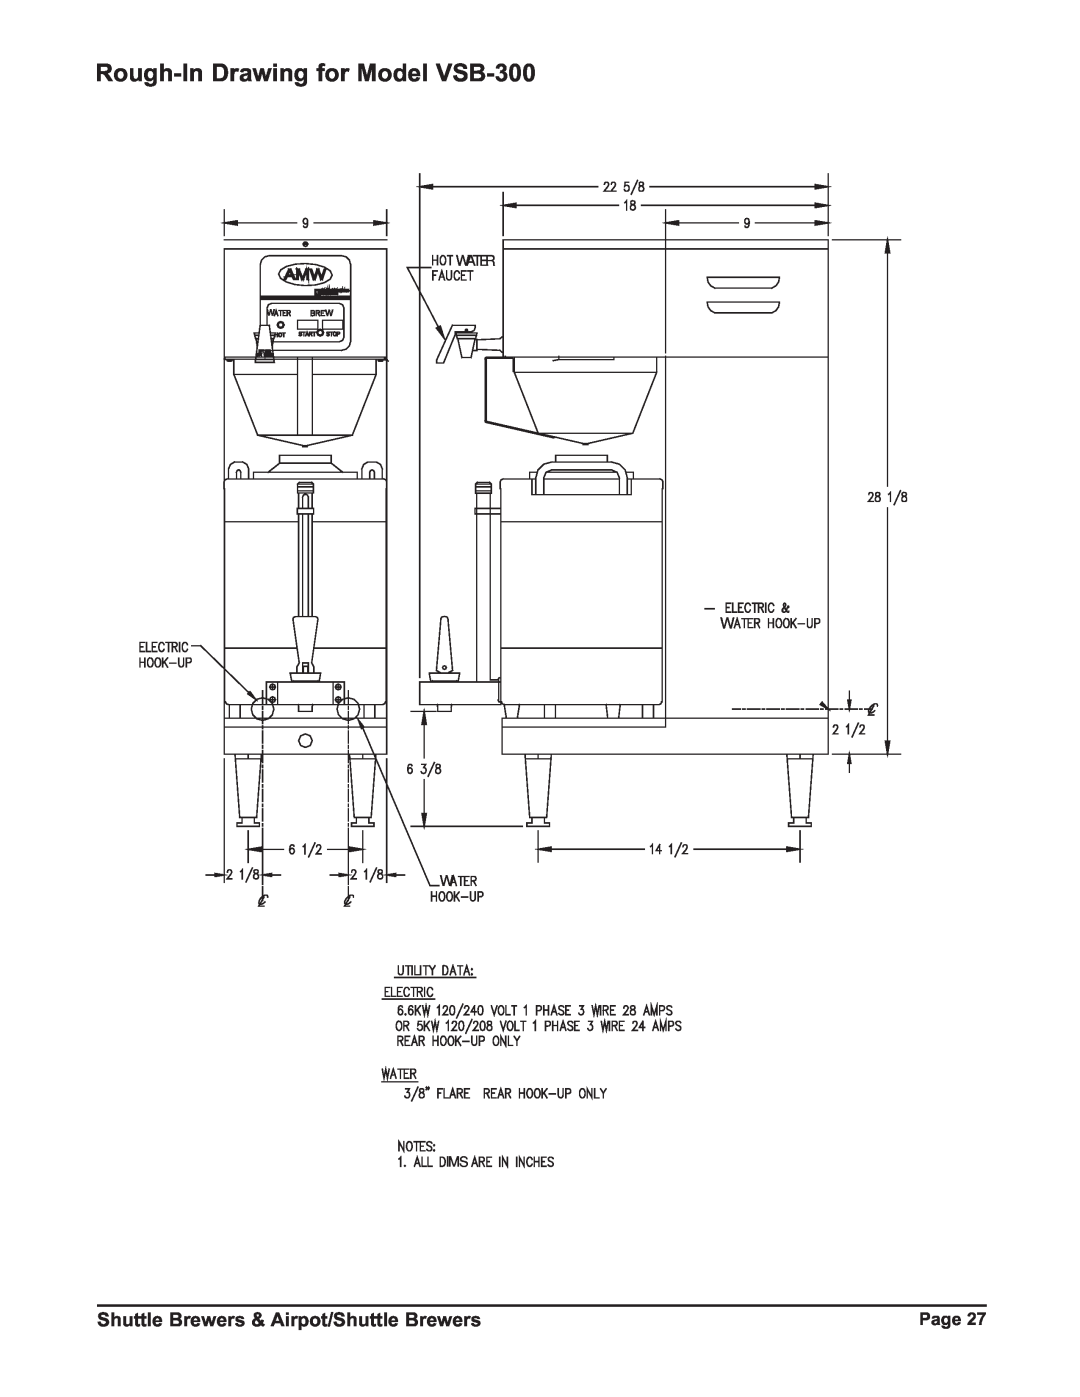 Grindmaster P400ESHP instruction manual Rough-In Drawing for Model VSB-300, Shuttle Brewers & Airpot/Shuttle Brewers, Page 